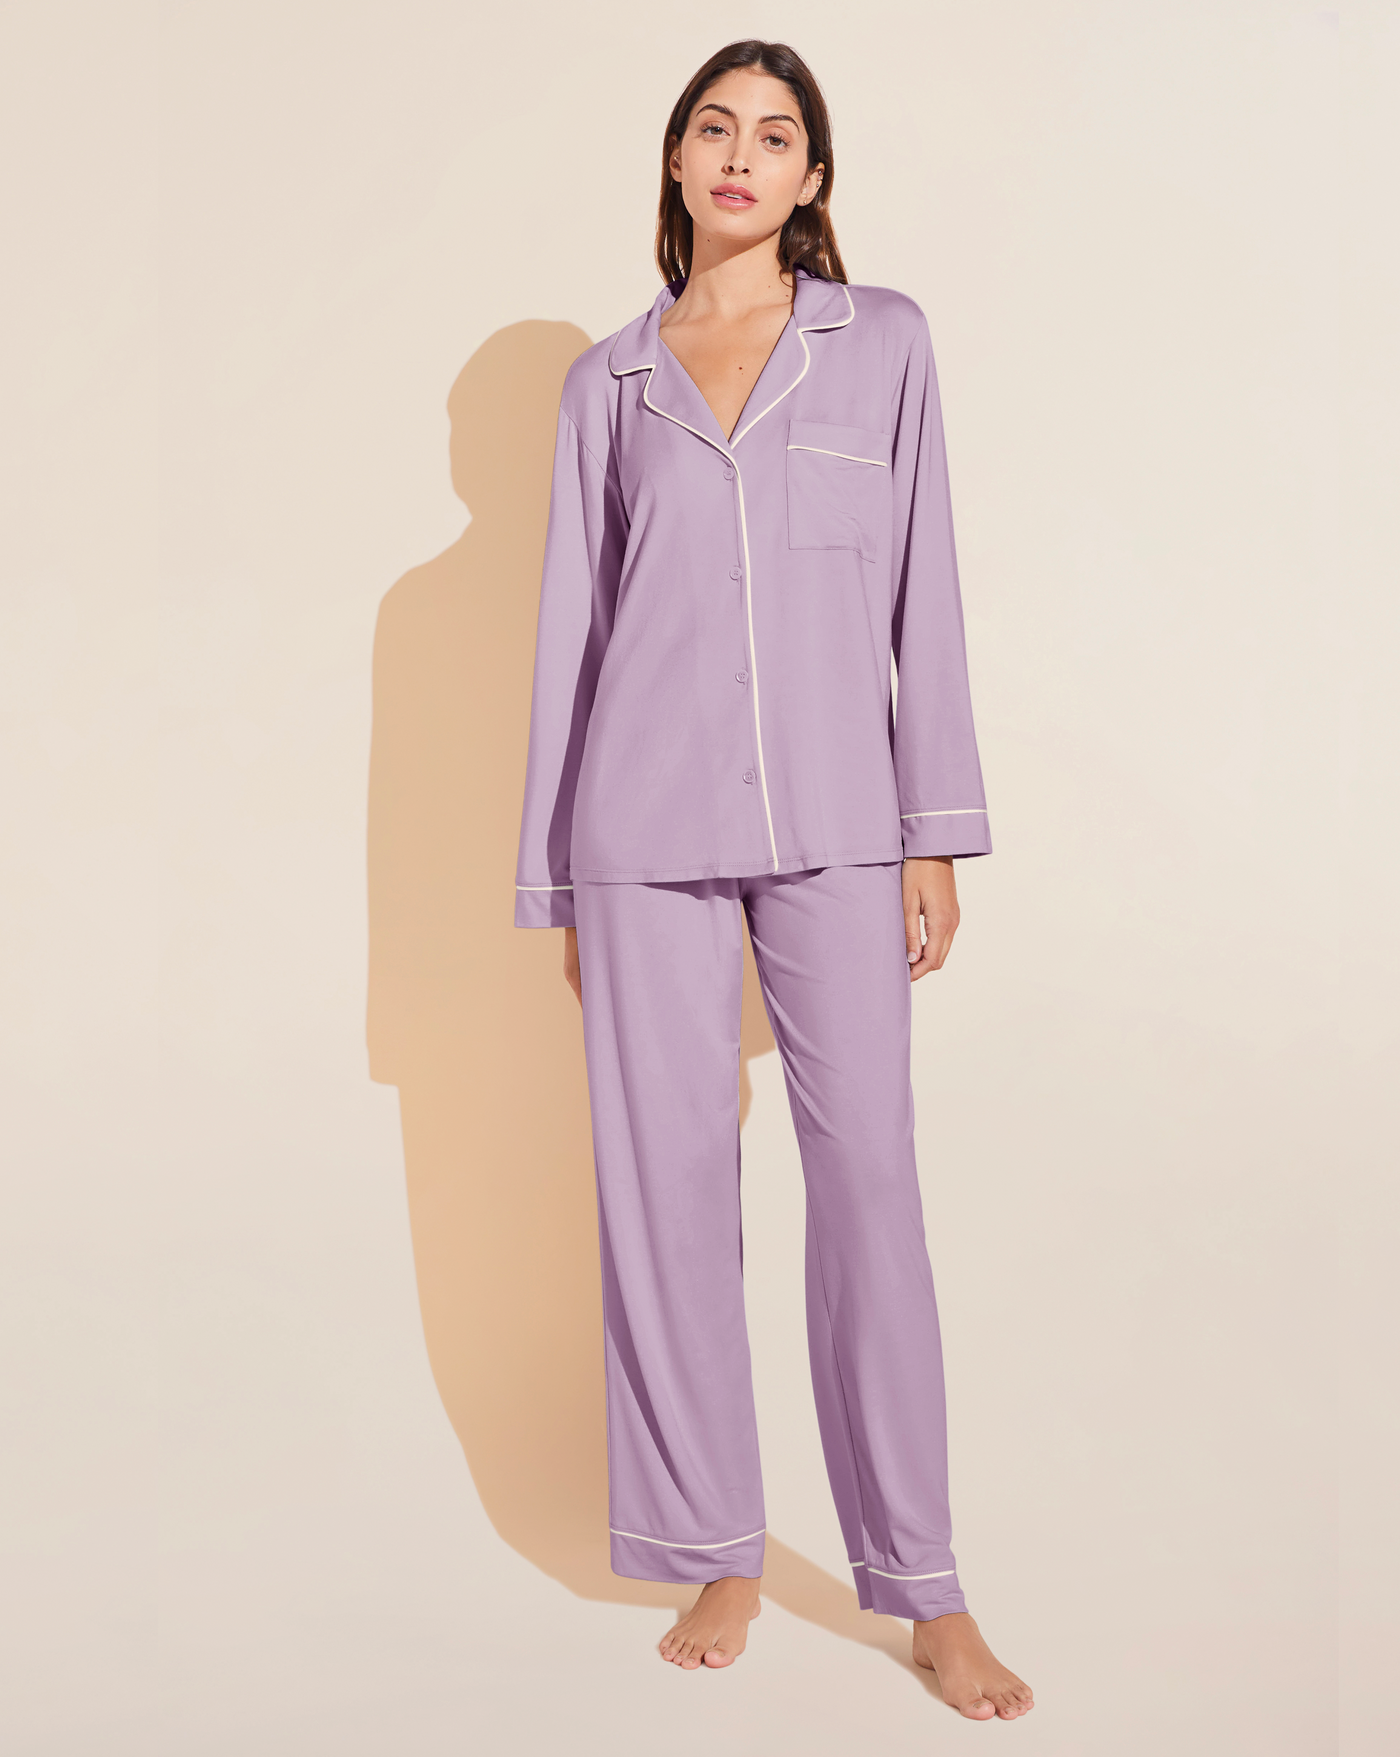 Classic long sleeve luxury pajama set with button front, collar and contrast piping in soft and comfortable lavender modal jersey.